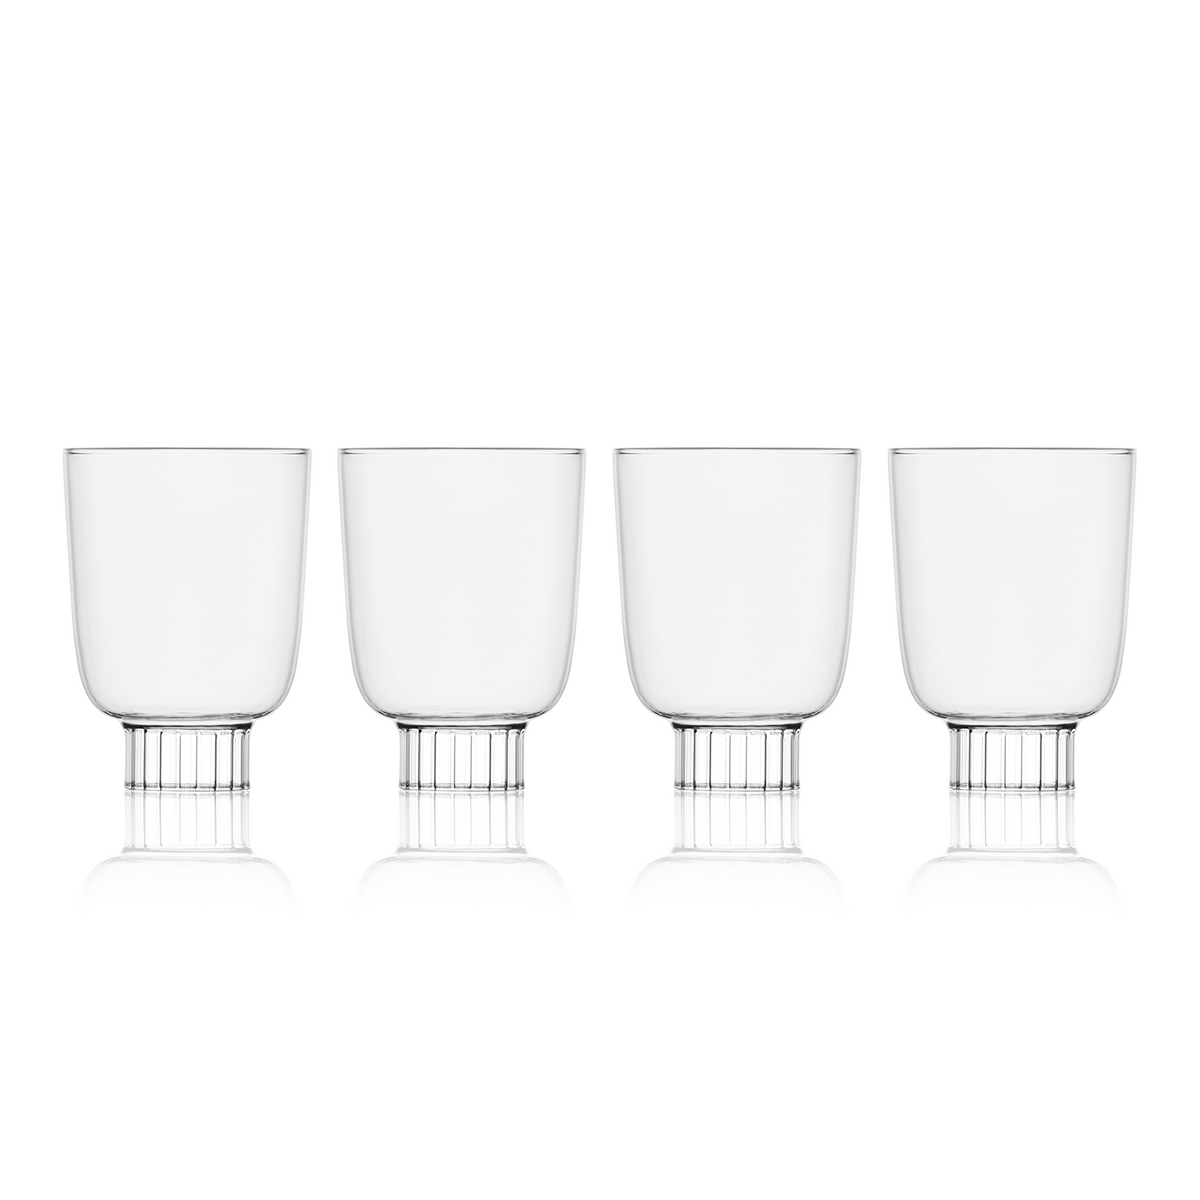 Set of four Sprezz premium borosilicate glass cocktail glasses, featuring a durable, elegant design with a ribbed base. These non-toxic, clear glasses are perfect for toasts and celebrations, dishwasher safe for convenience, and blend form and function for a memorable dinner party, designed for the discerning host.